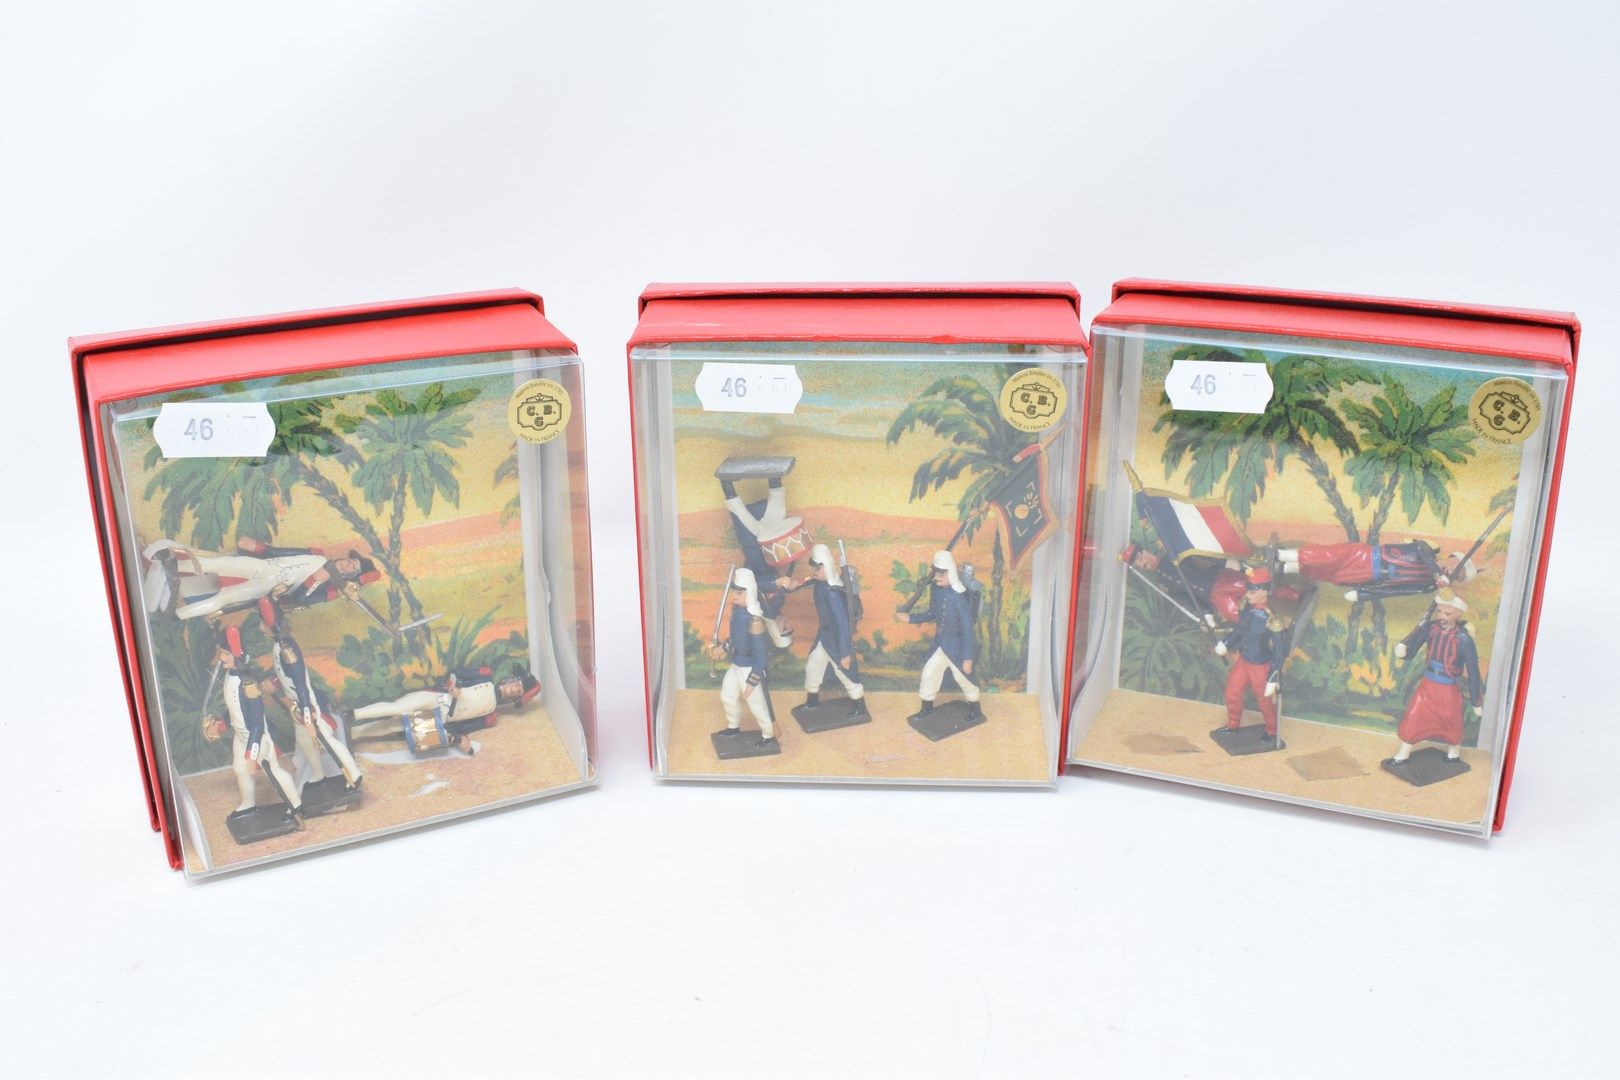 Null CBG Ronde Bosse : Three small dioramas in blister pack representing four fi&hellip;